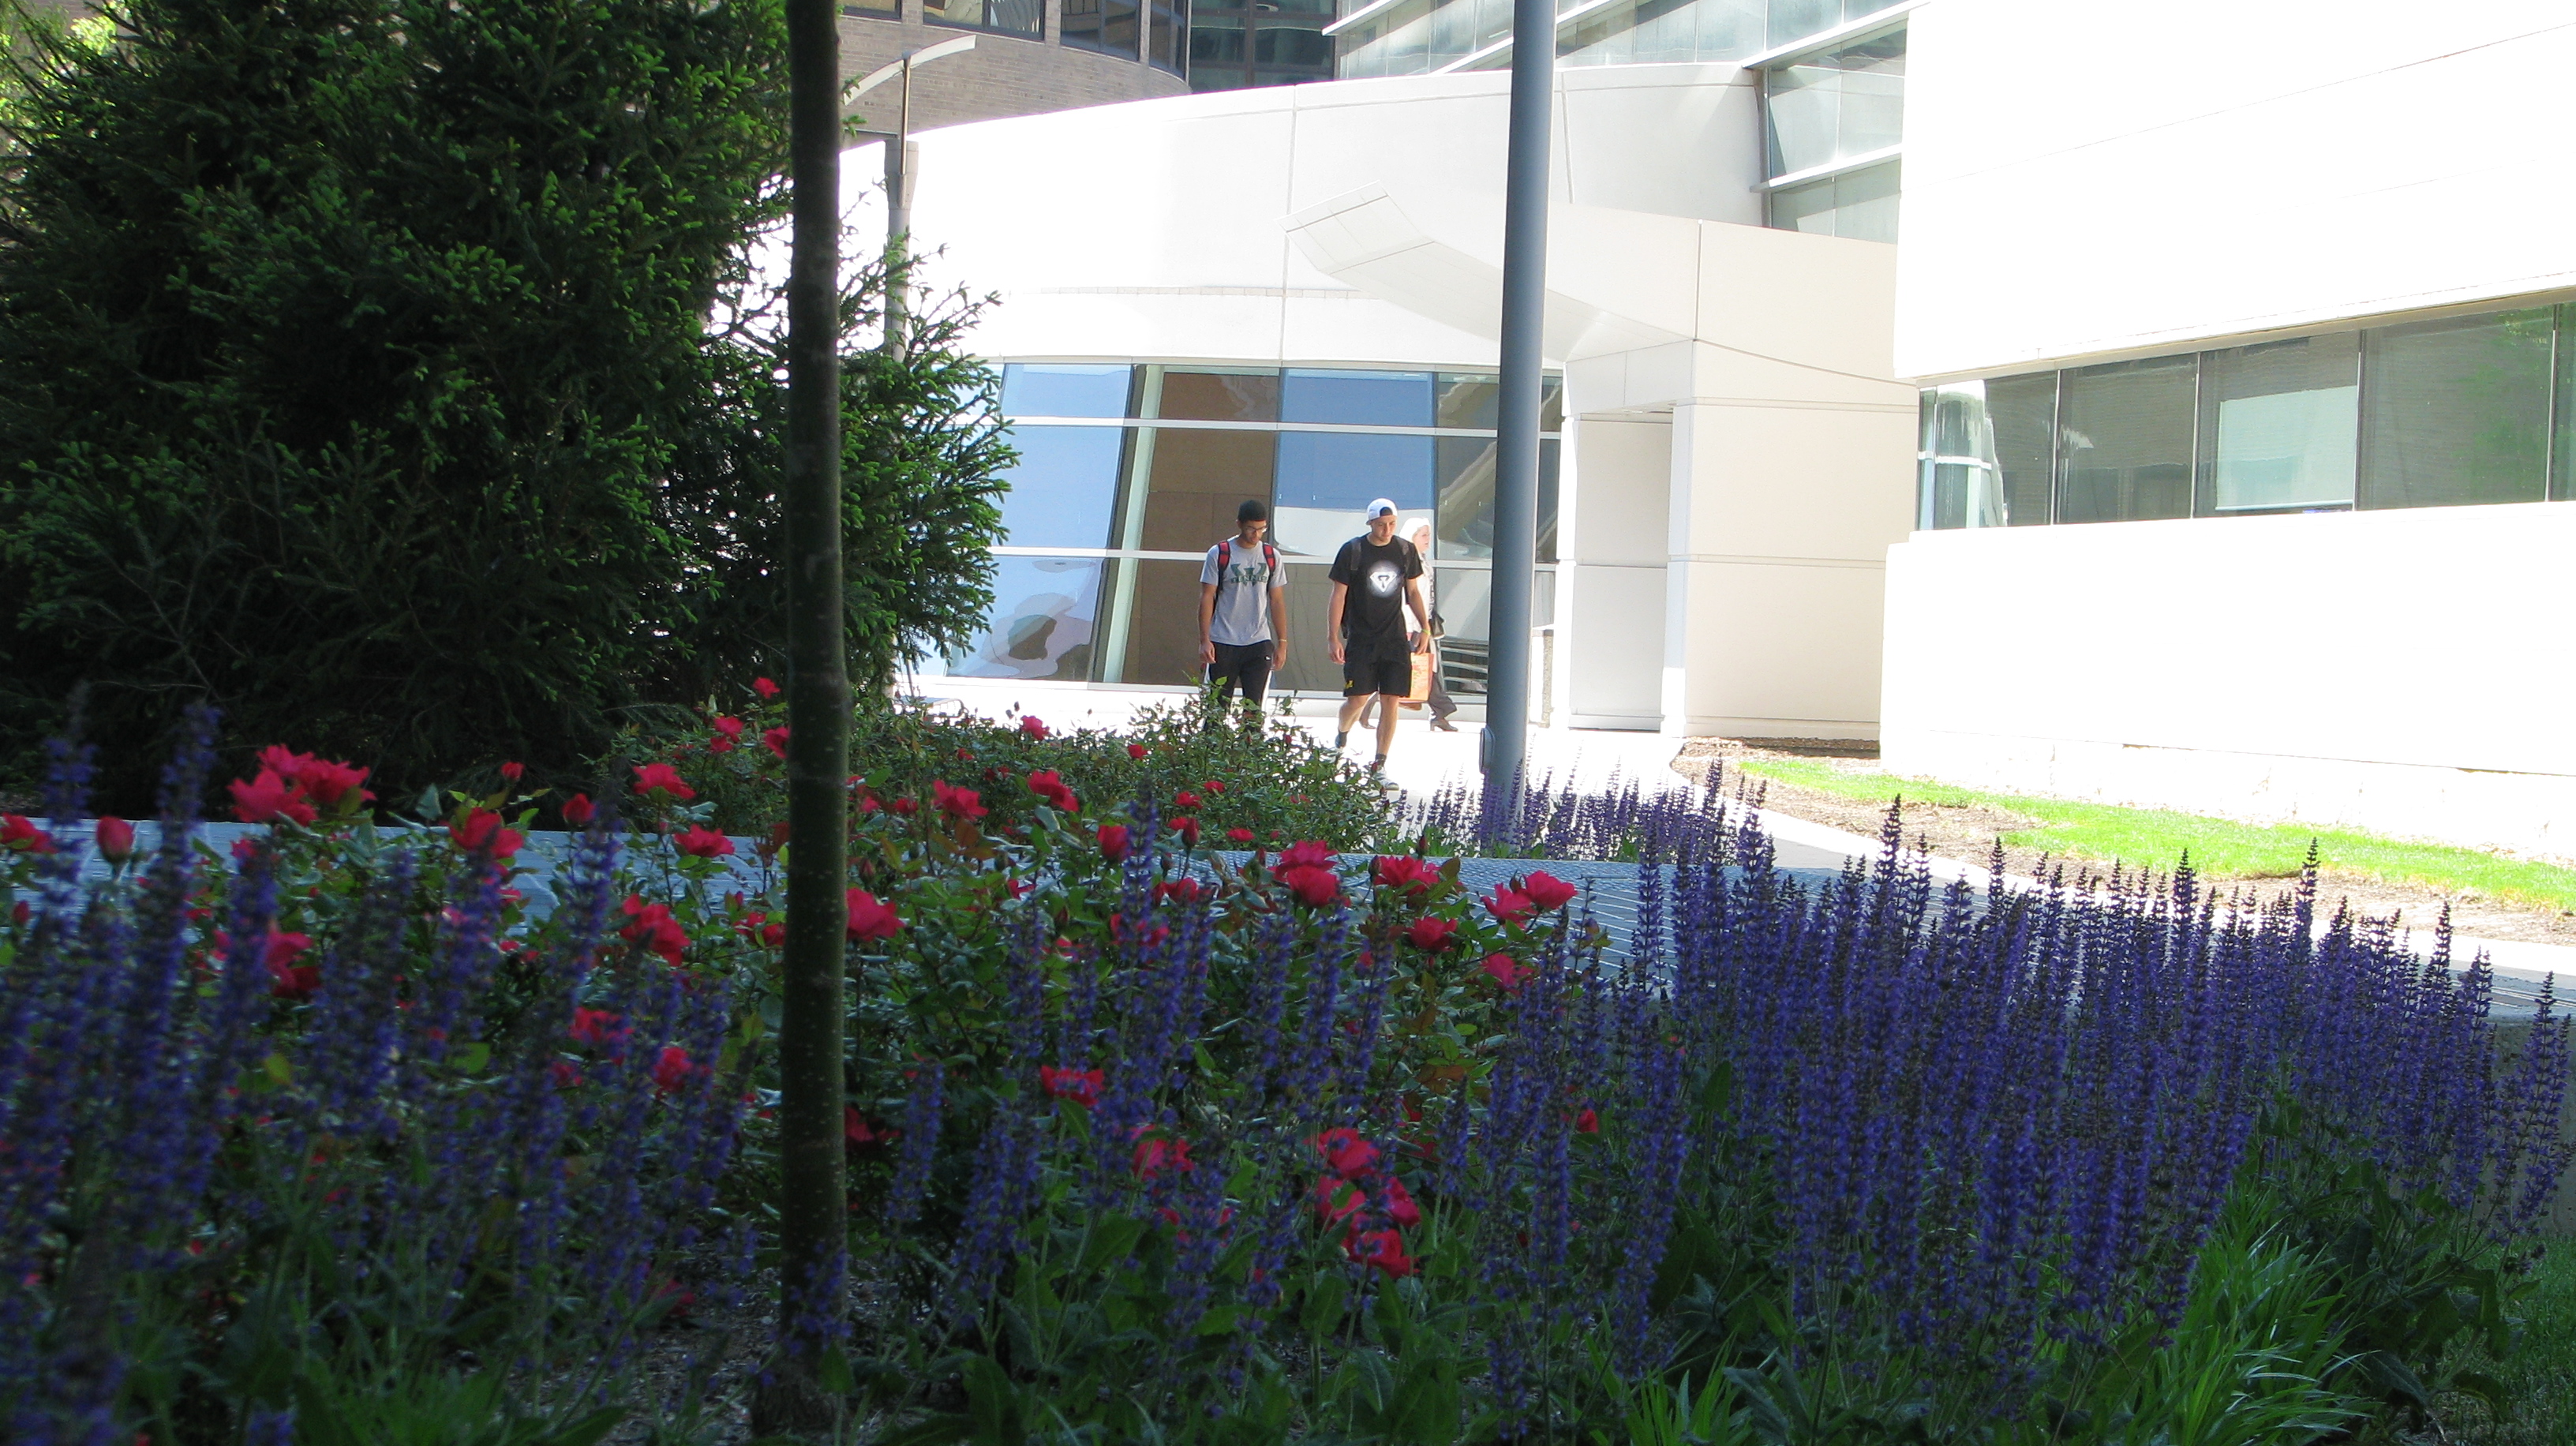 A couple of students walking down a path alongside a row of purple and red flowers.